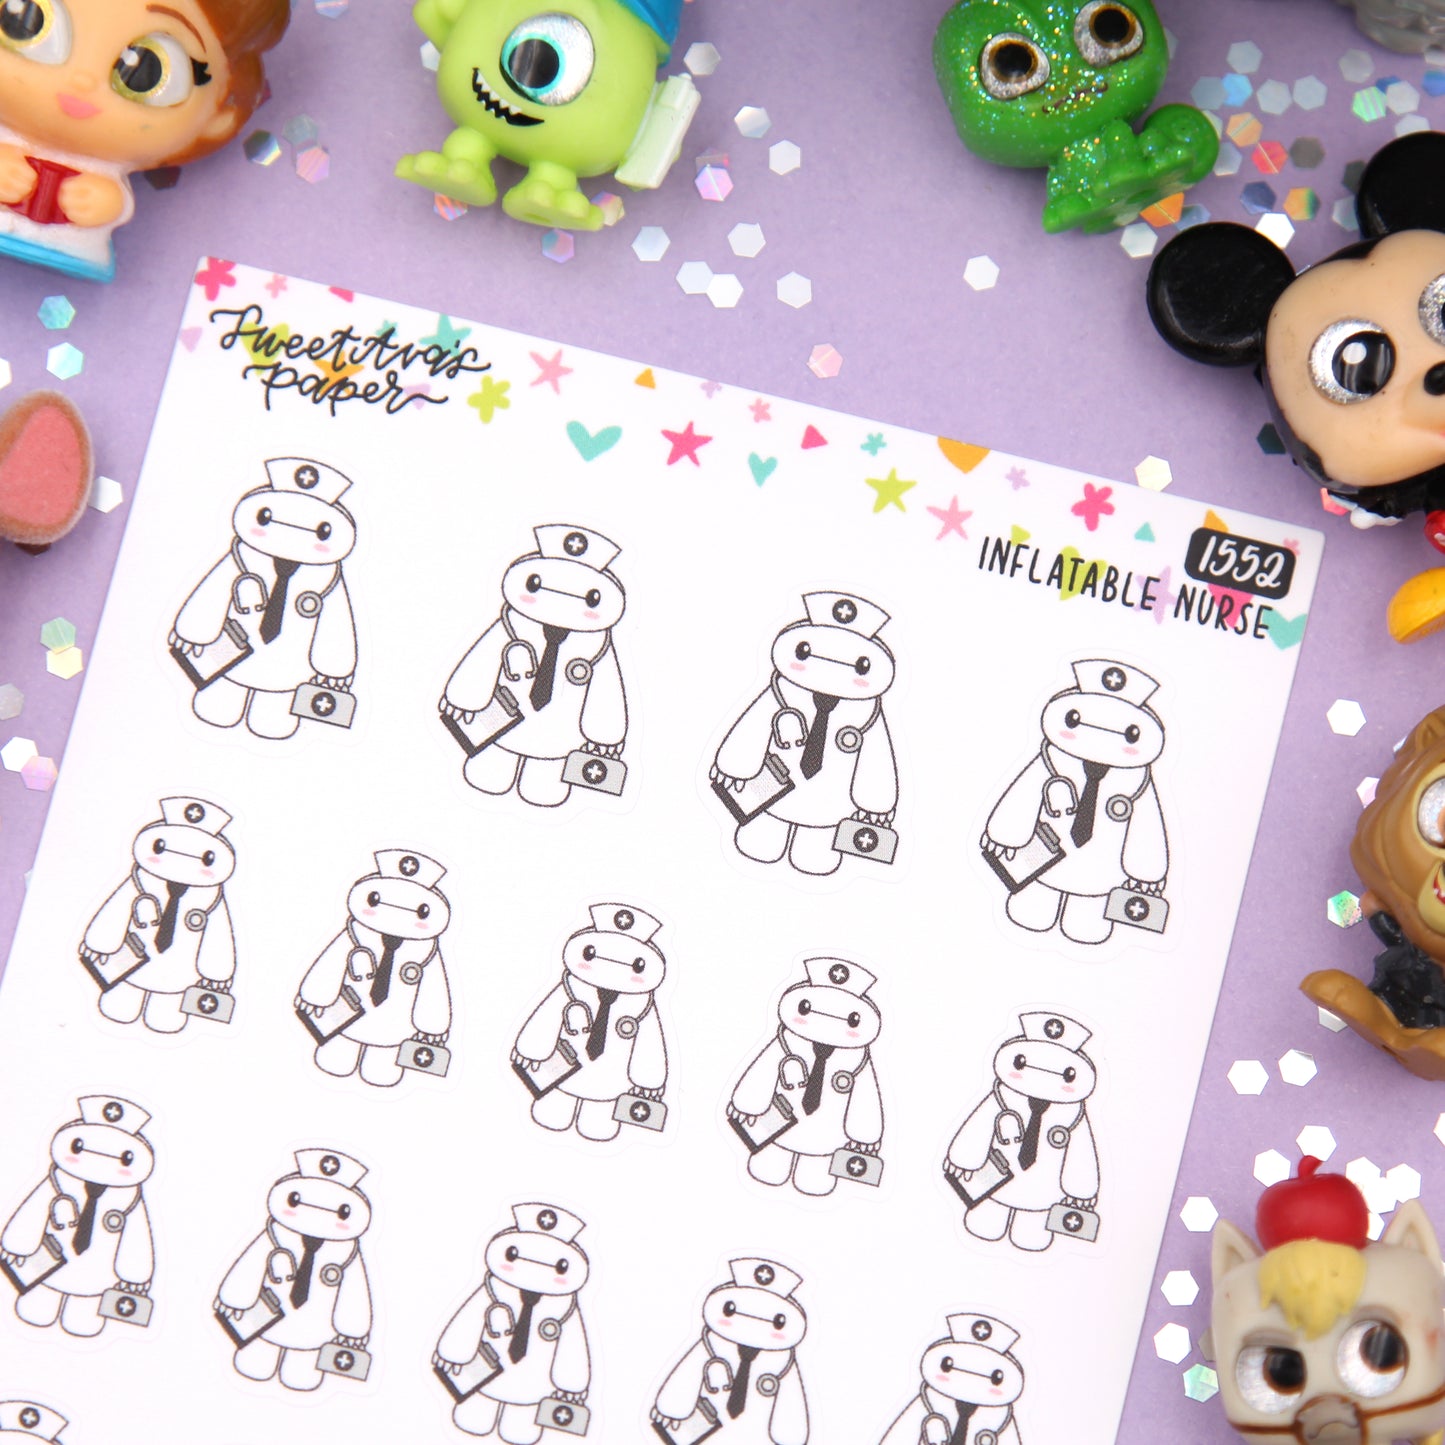 Inflatable Nurse Planner Stickers - Magical Planner Stickers - Magical May - [1552]